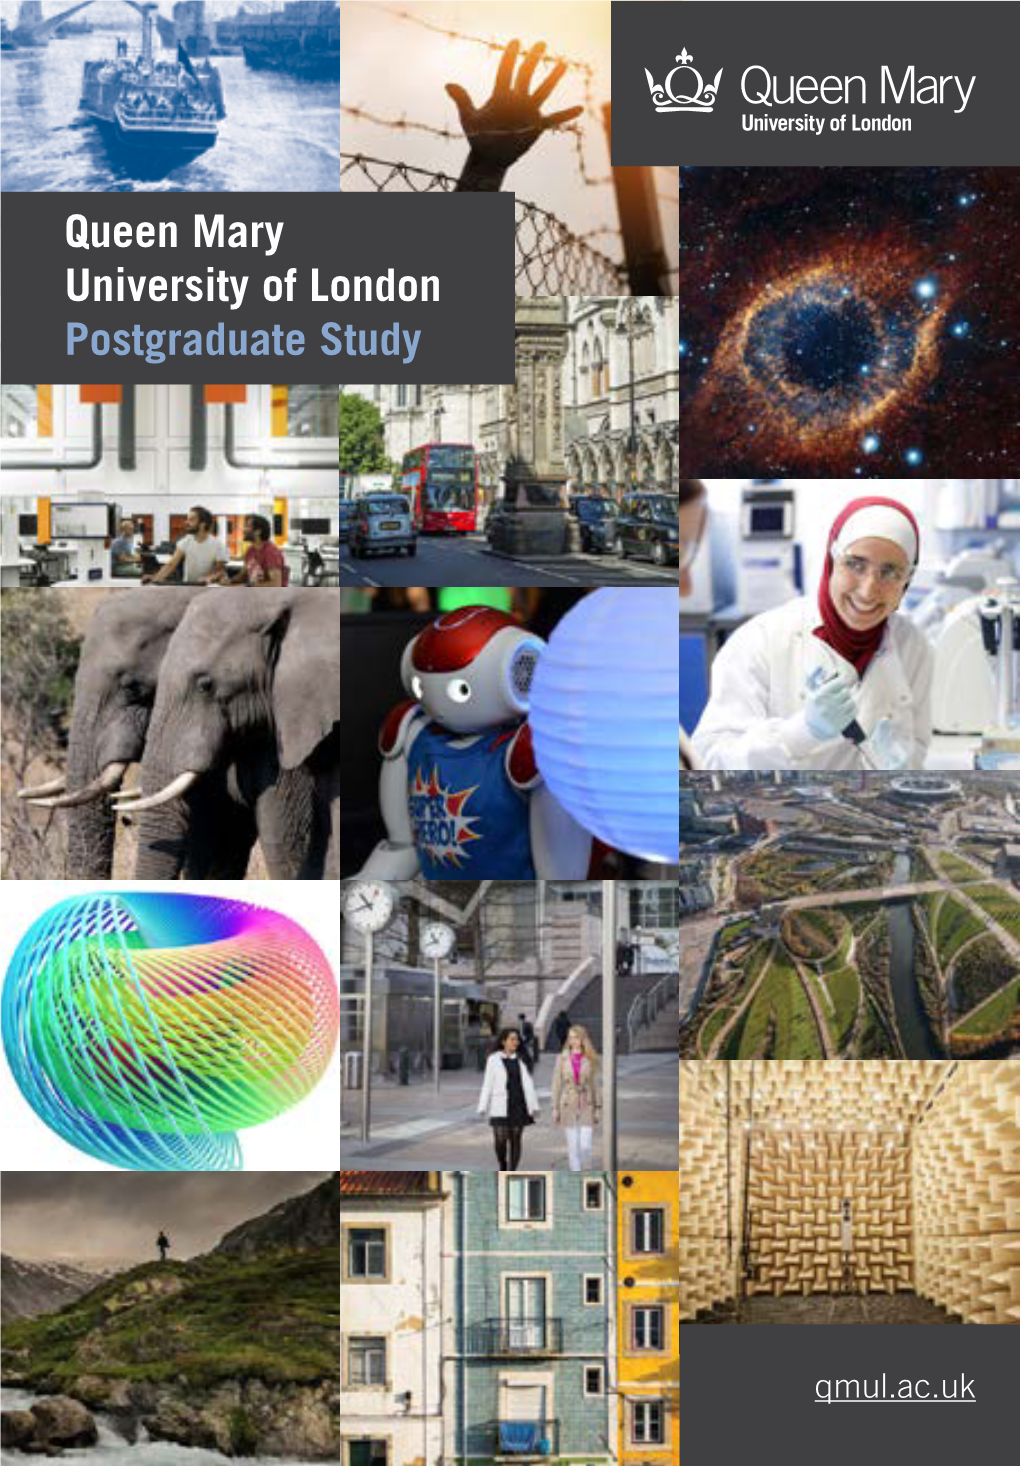 Queen Mary University of London (Qmul)